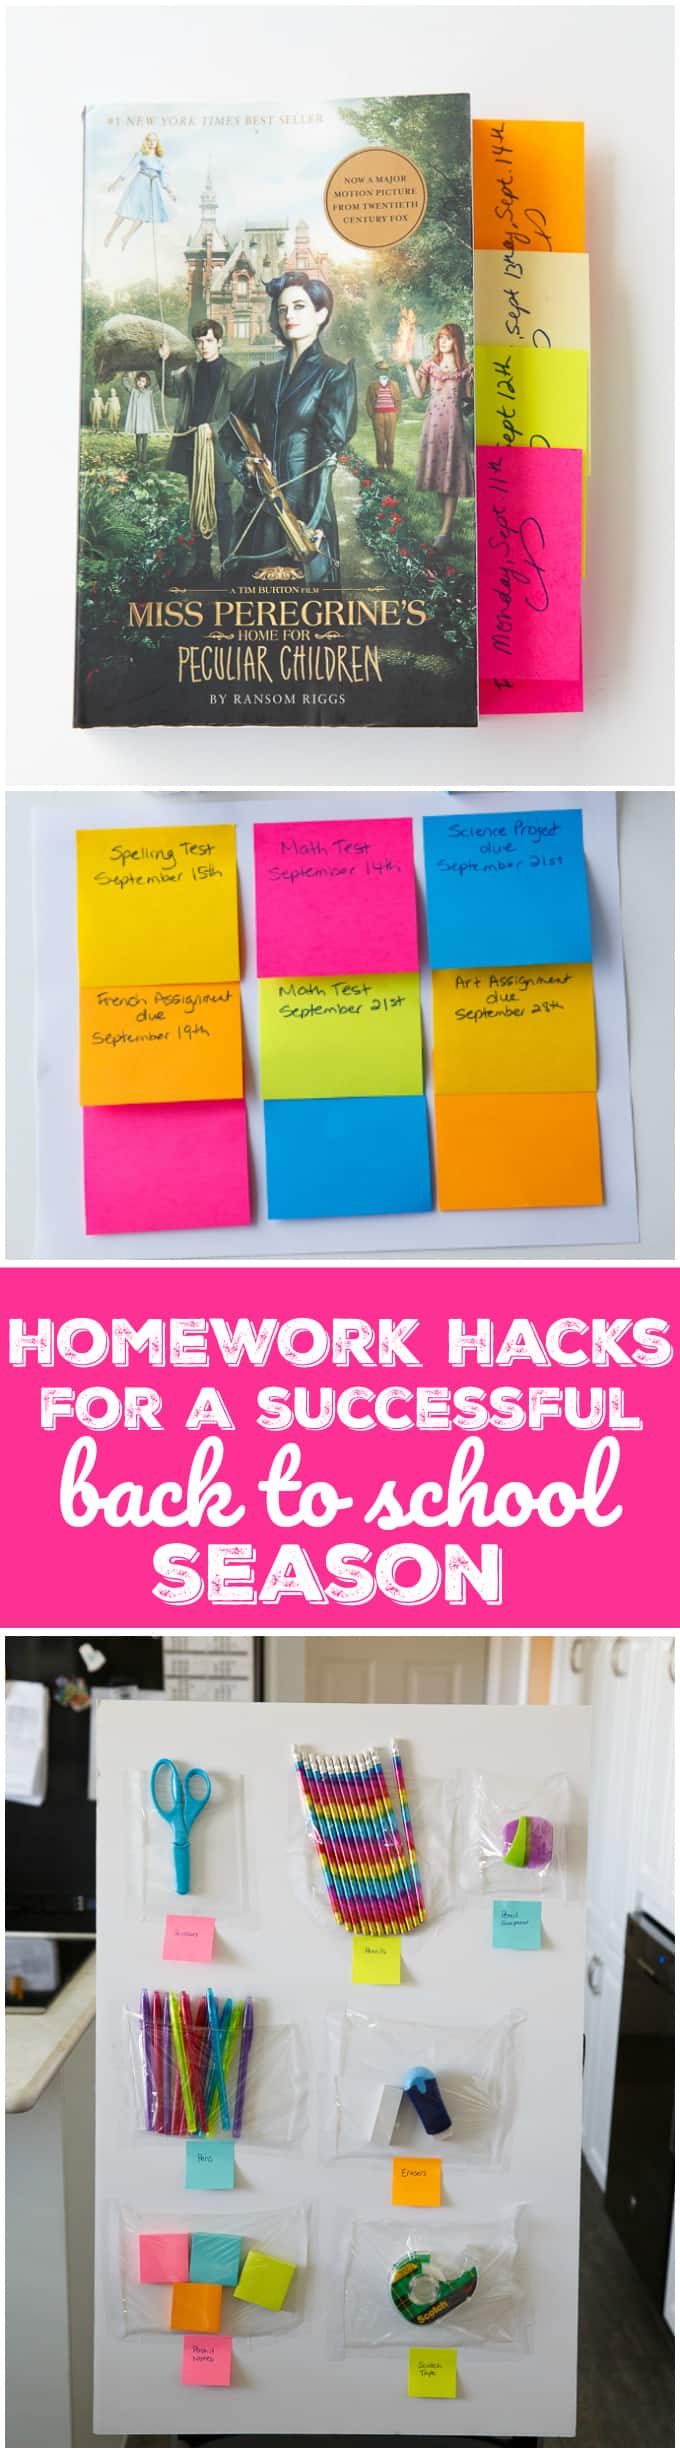 Homework Hacks for a Successful Back to School Season - Try these simple tips to make homework less stressful and more productive! 